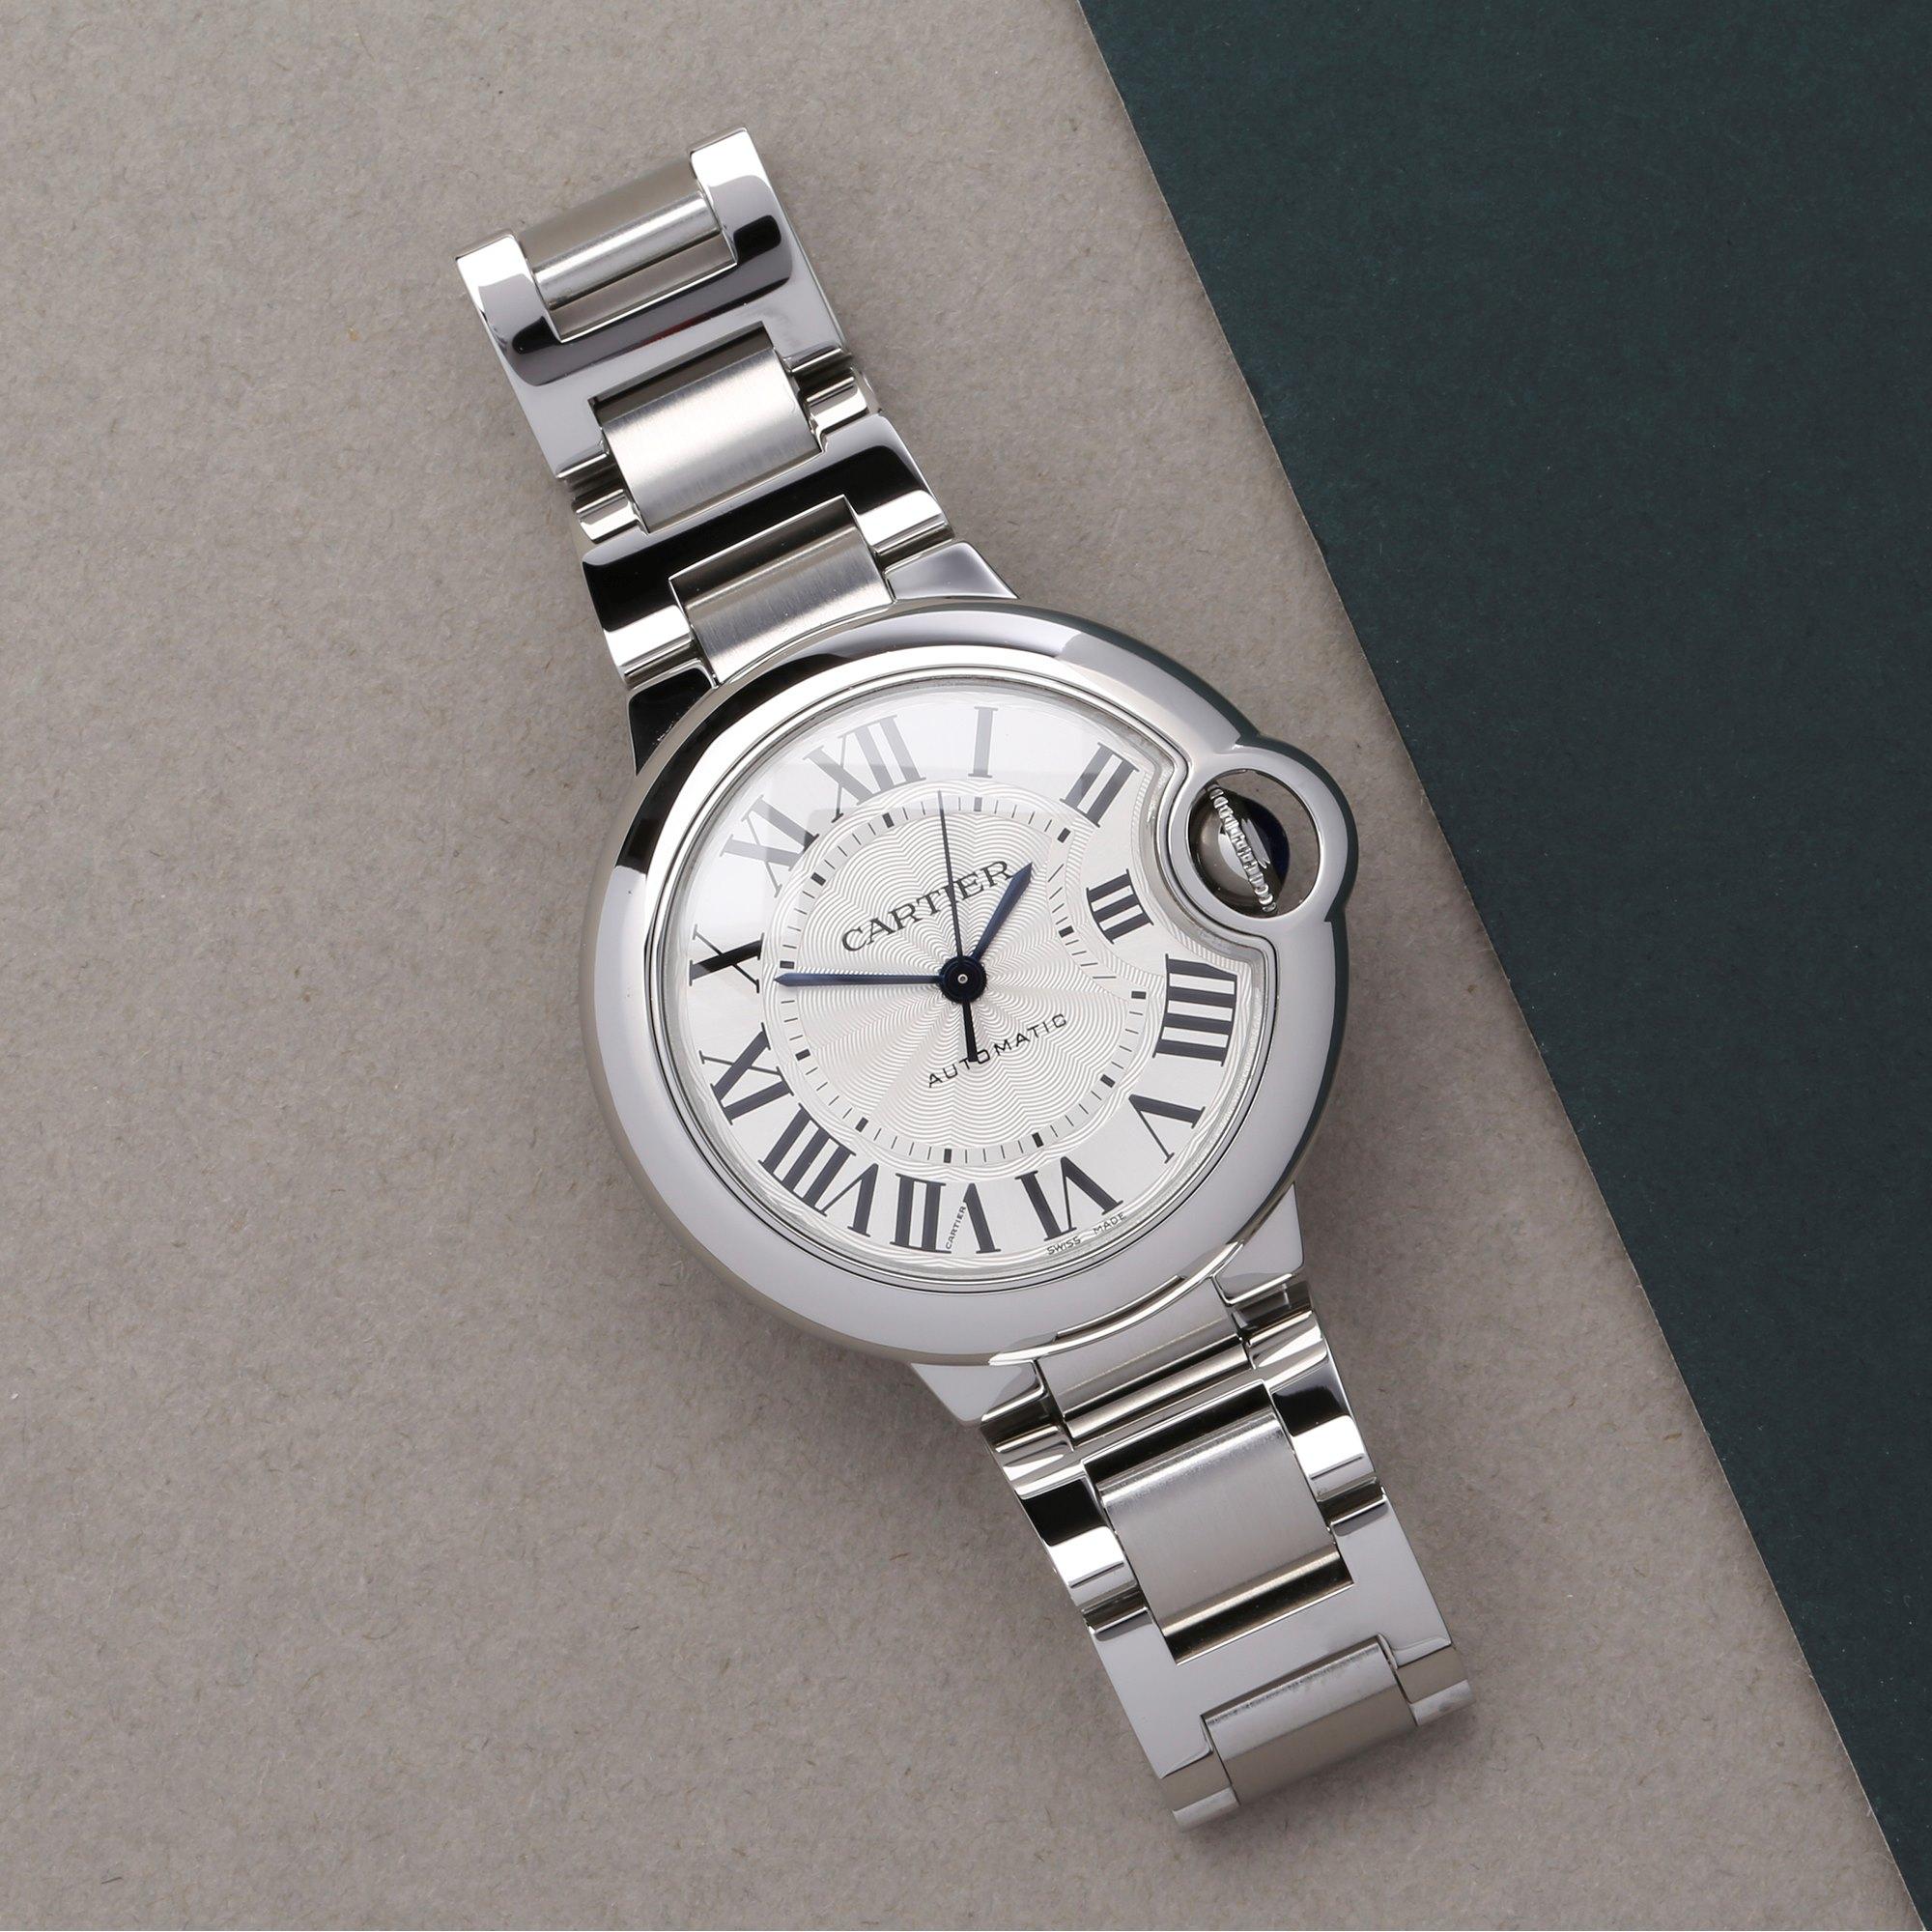 Xupes Reference: W007833
Manufacturer: Cartier
Model: Ballon Bleu
Model Variant: 0
Model Number: W6920071 or 3489
Age: 2010
Gender: Ladies
Complete With: Cartier Box & Manuals
Dial: Silver Roman
Glass: Sapphire Crystal
Case Size: 33mm
Case Material: